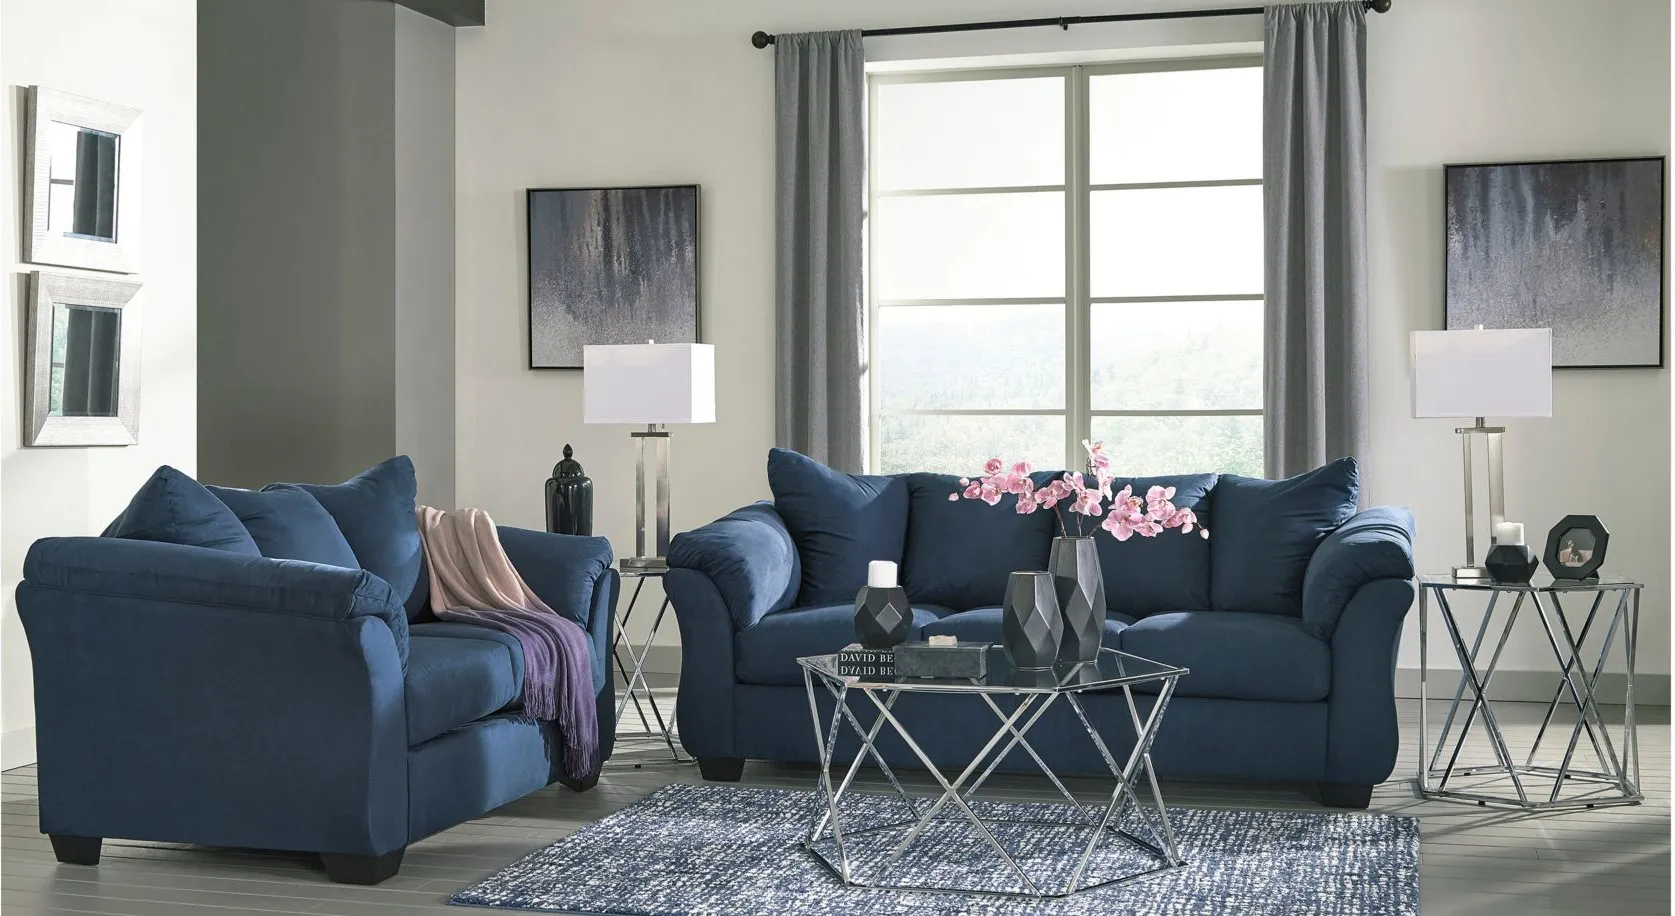 Whitman 2-pc. Sofa and Loveseat Set in Blue by Ashley Furniture